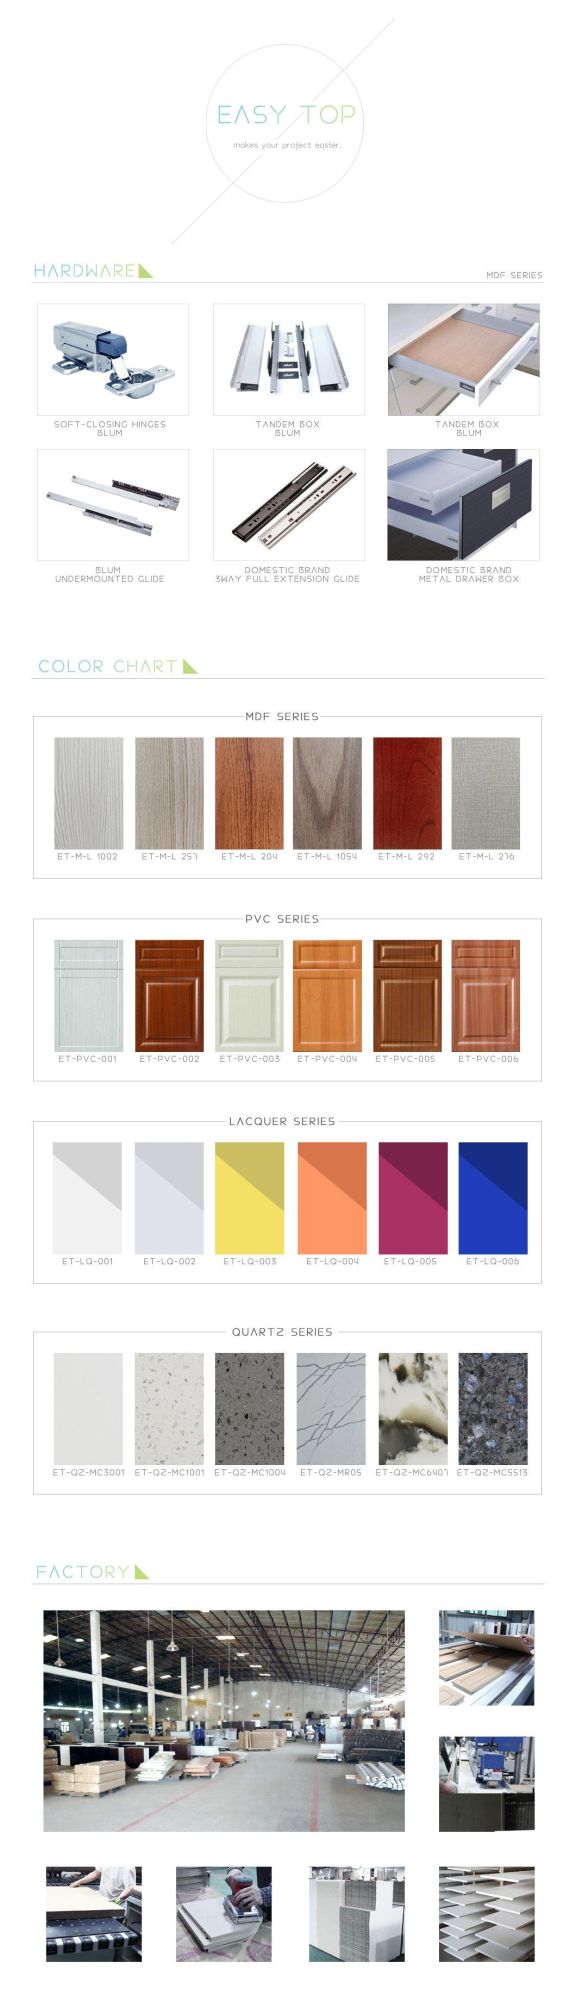 Simple Pure White Cupboard High Quality Plywood MDF PVC Finish Kitchen Cabinet Customized Design